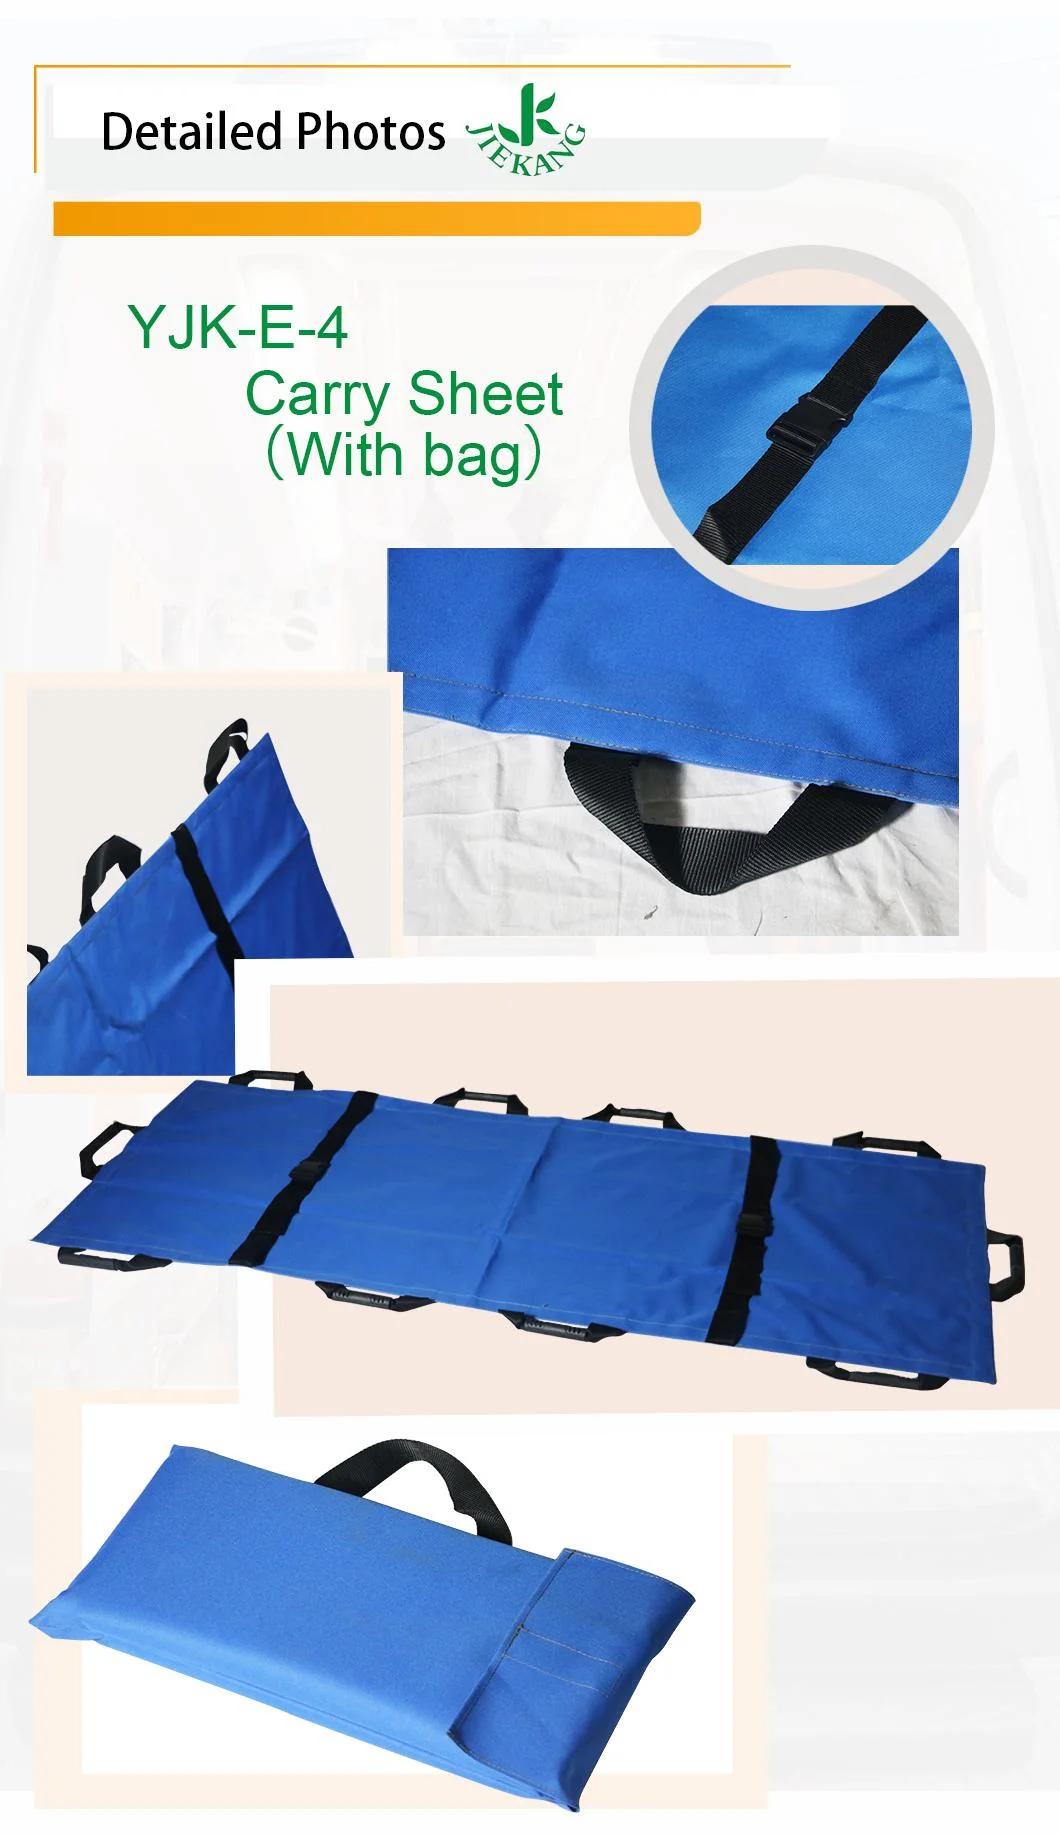 Lightweight Portable Professional Hospital Ambulance Carry Sheet Stretcher with Bag